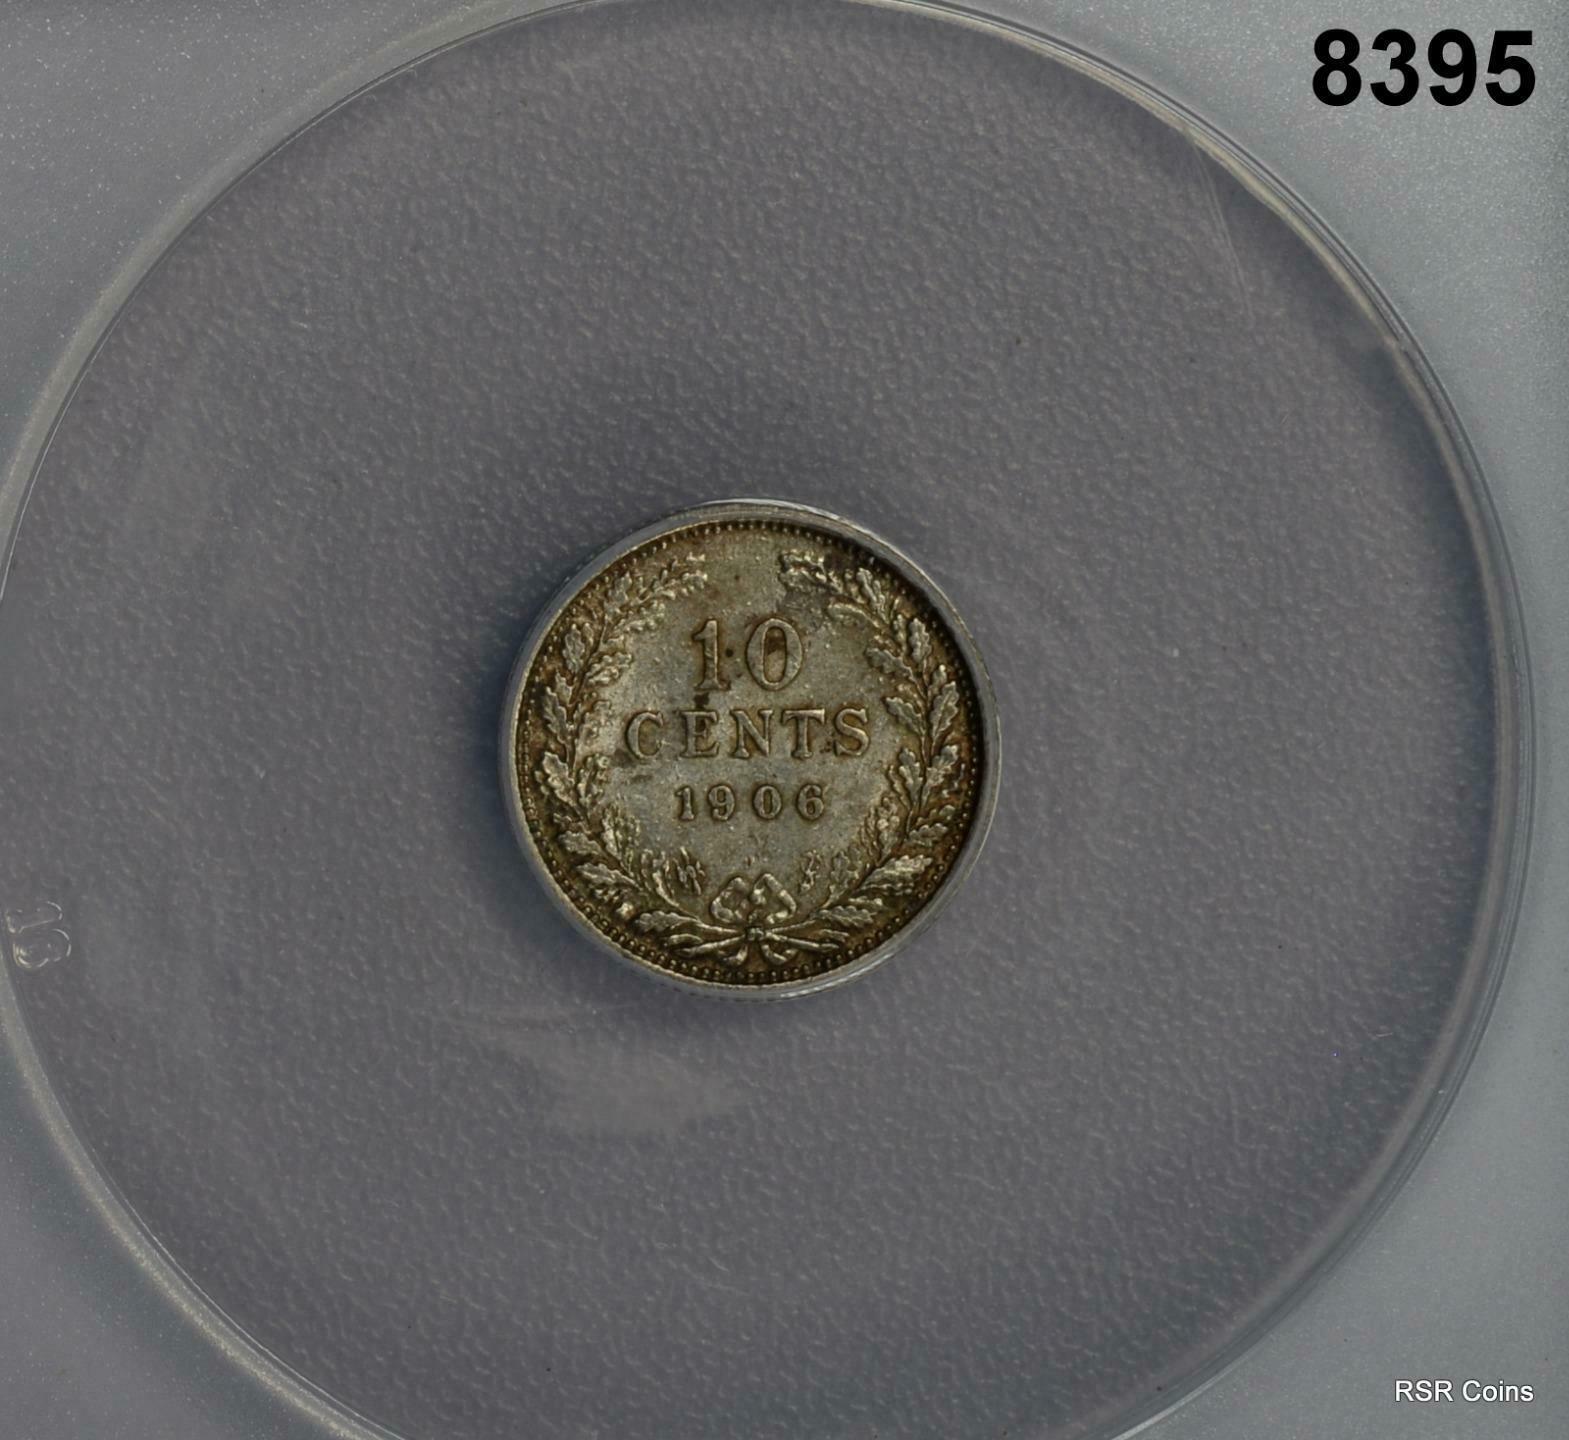 1906 NETHERLANDS 10 CENTS ANACS CERTIFIED AU50 #8395